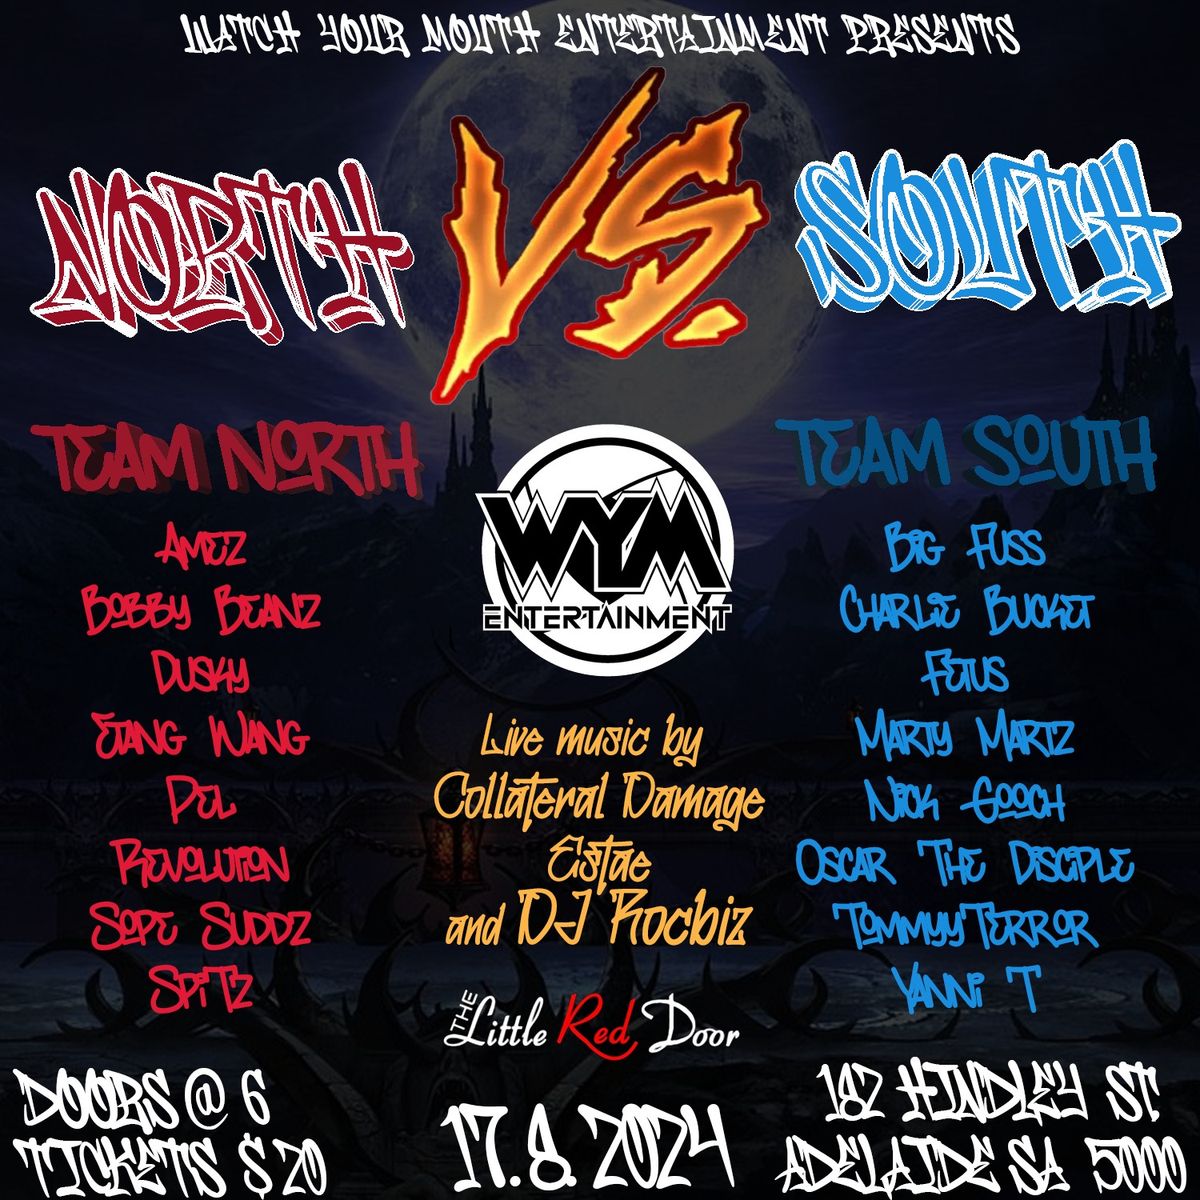 North VS South - Watch Your Mouth Entertainment